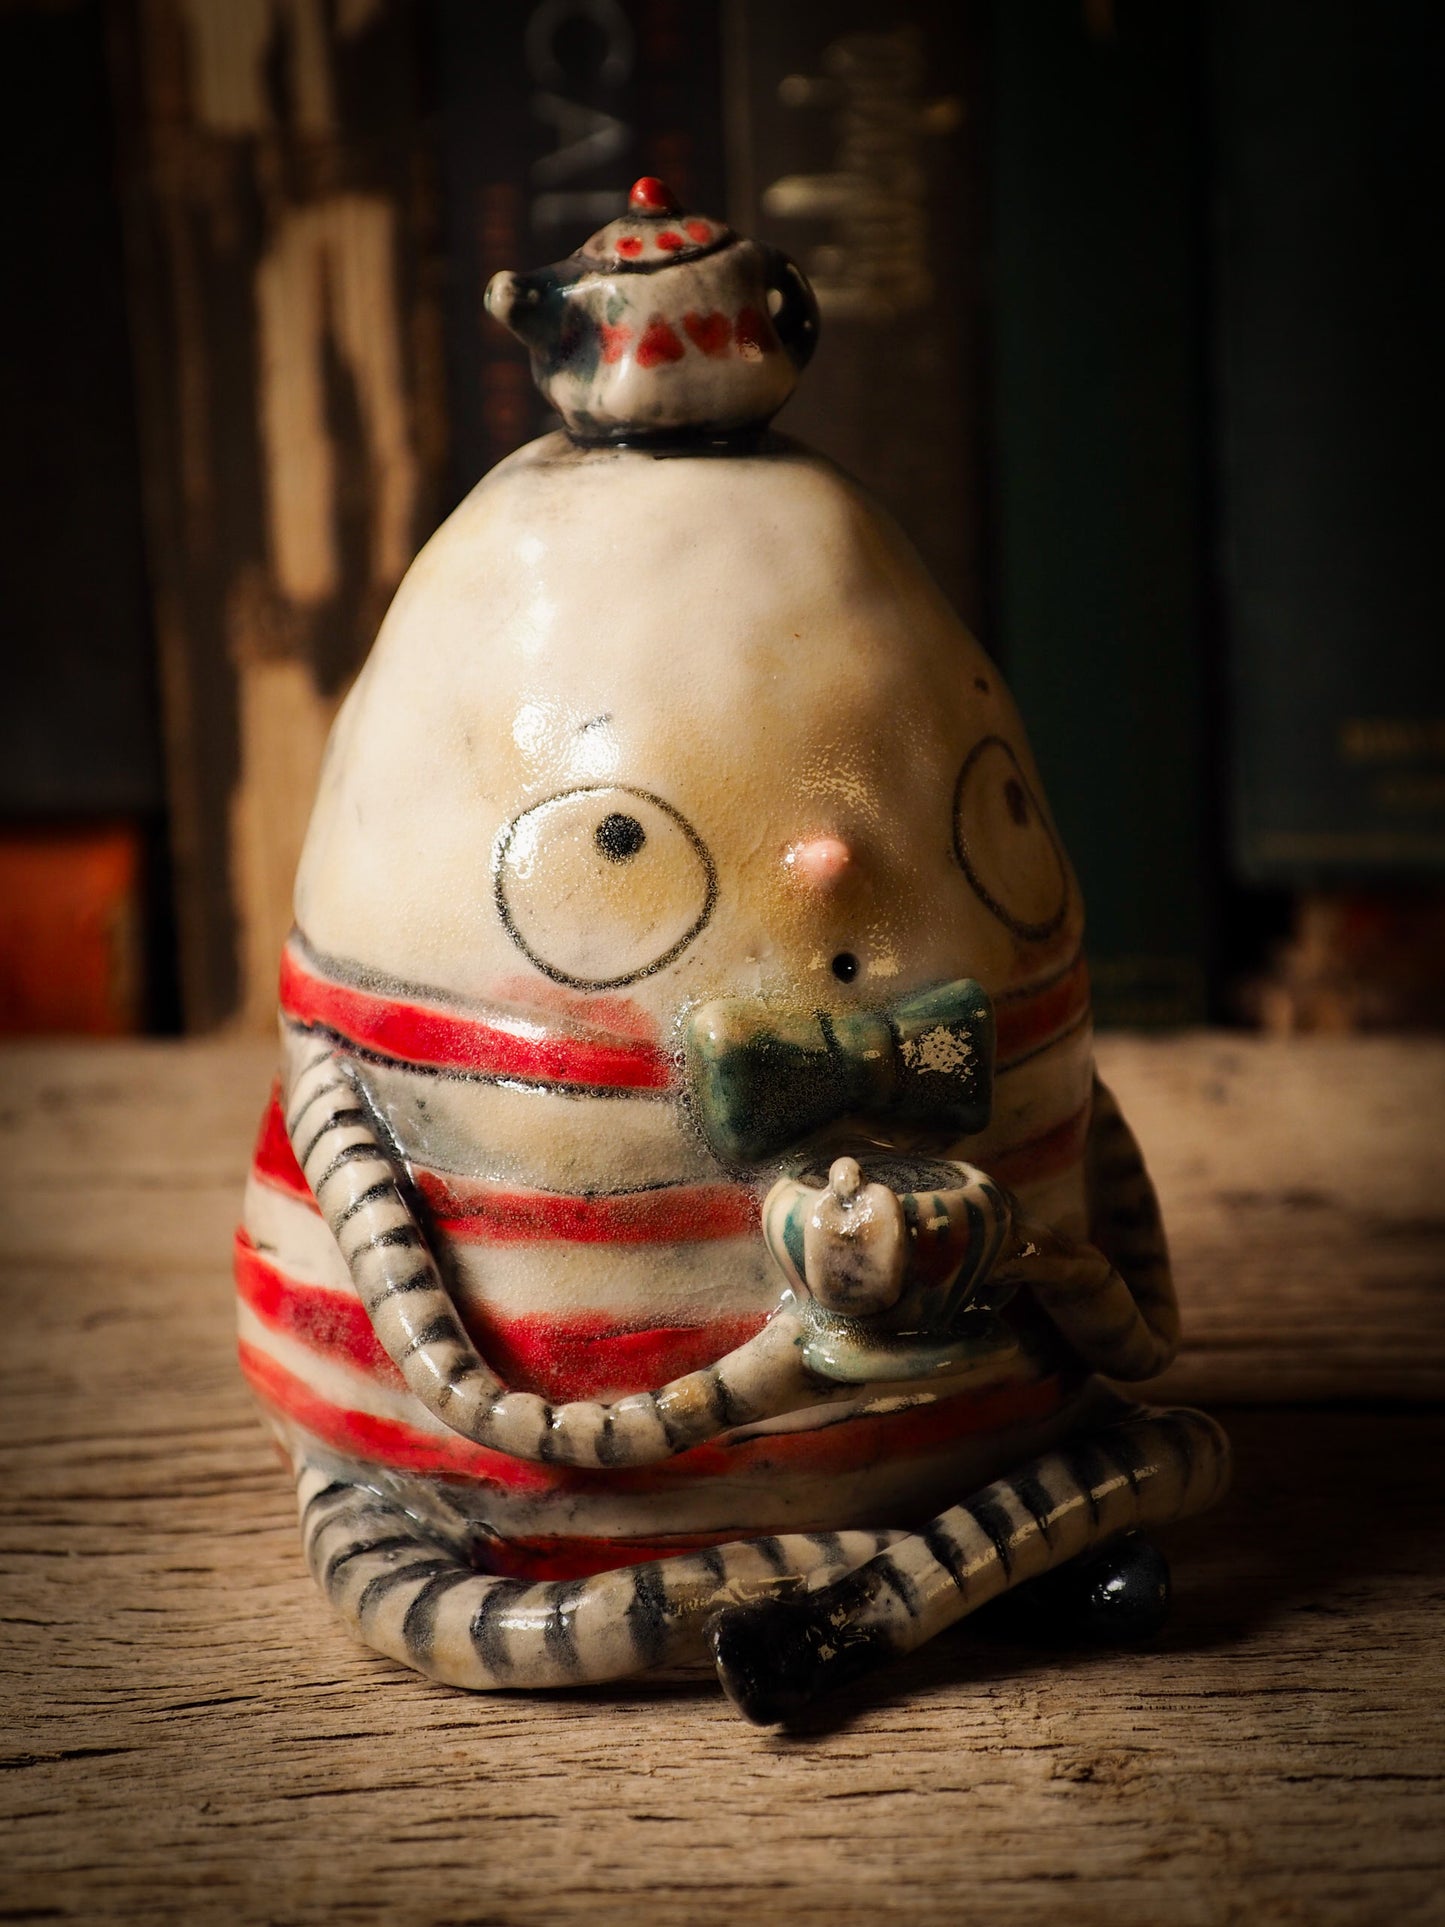 Humpty Dumpty vintage egg ceramic figure inspired by Alice in Wonderland made by Idania Salcido, the mixed media artist and ceramist behind Danita Art. Earth clay is hand sculpted and glazed and kiln fired to create a ceramic home decor heirloom figurine. Each unique art piece is a one of a kind fine pottery artwork.